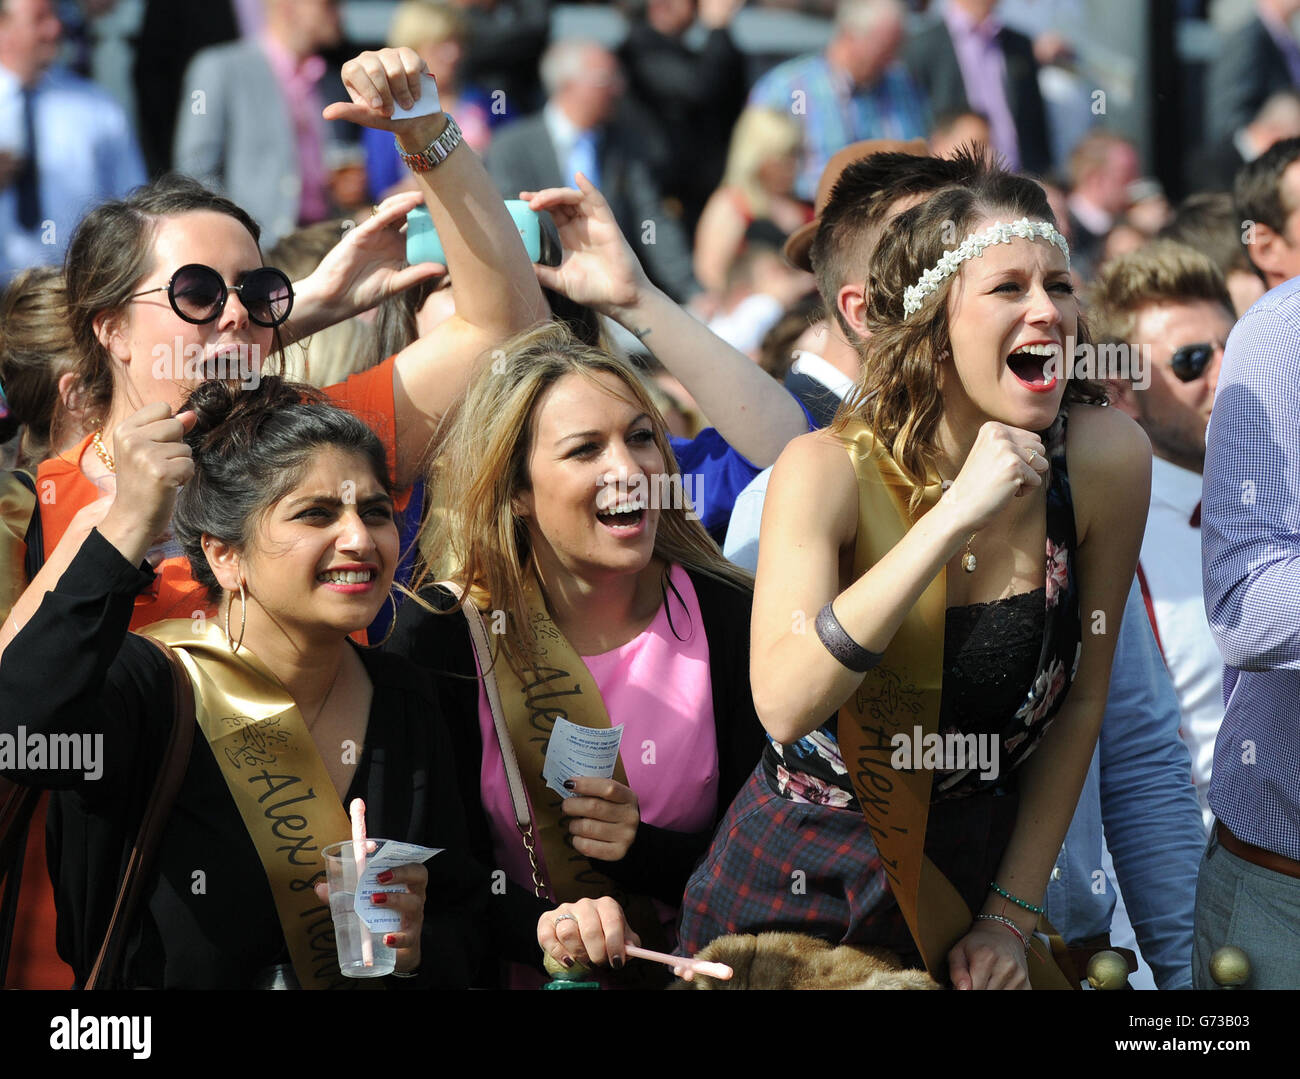 Horse Racing - Sandy Lane Stakes - Haydock Park Racecourse. Racegoers cheer on the action during the Sandy Lane Stakes day at Haydock Park Racecourse. Stock Photo